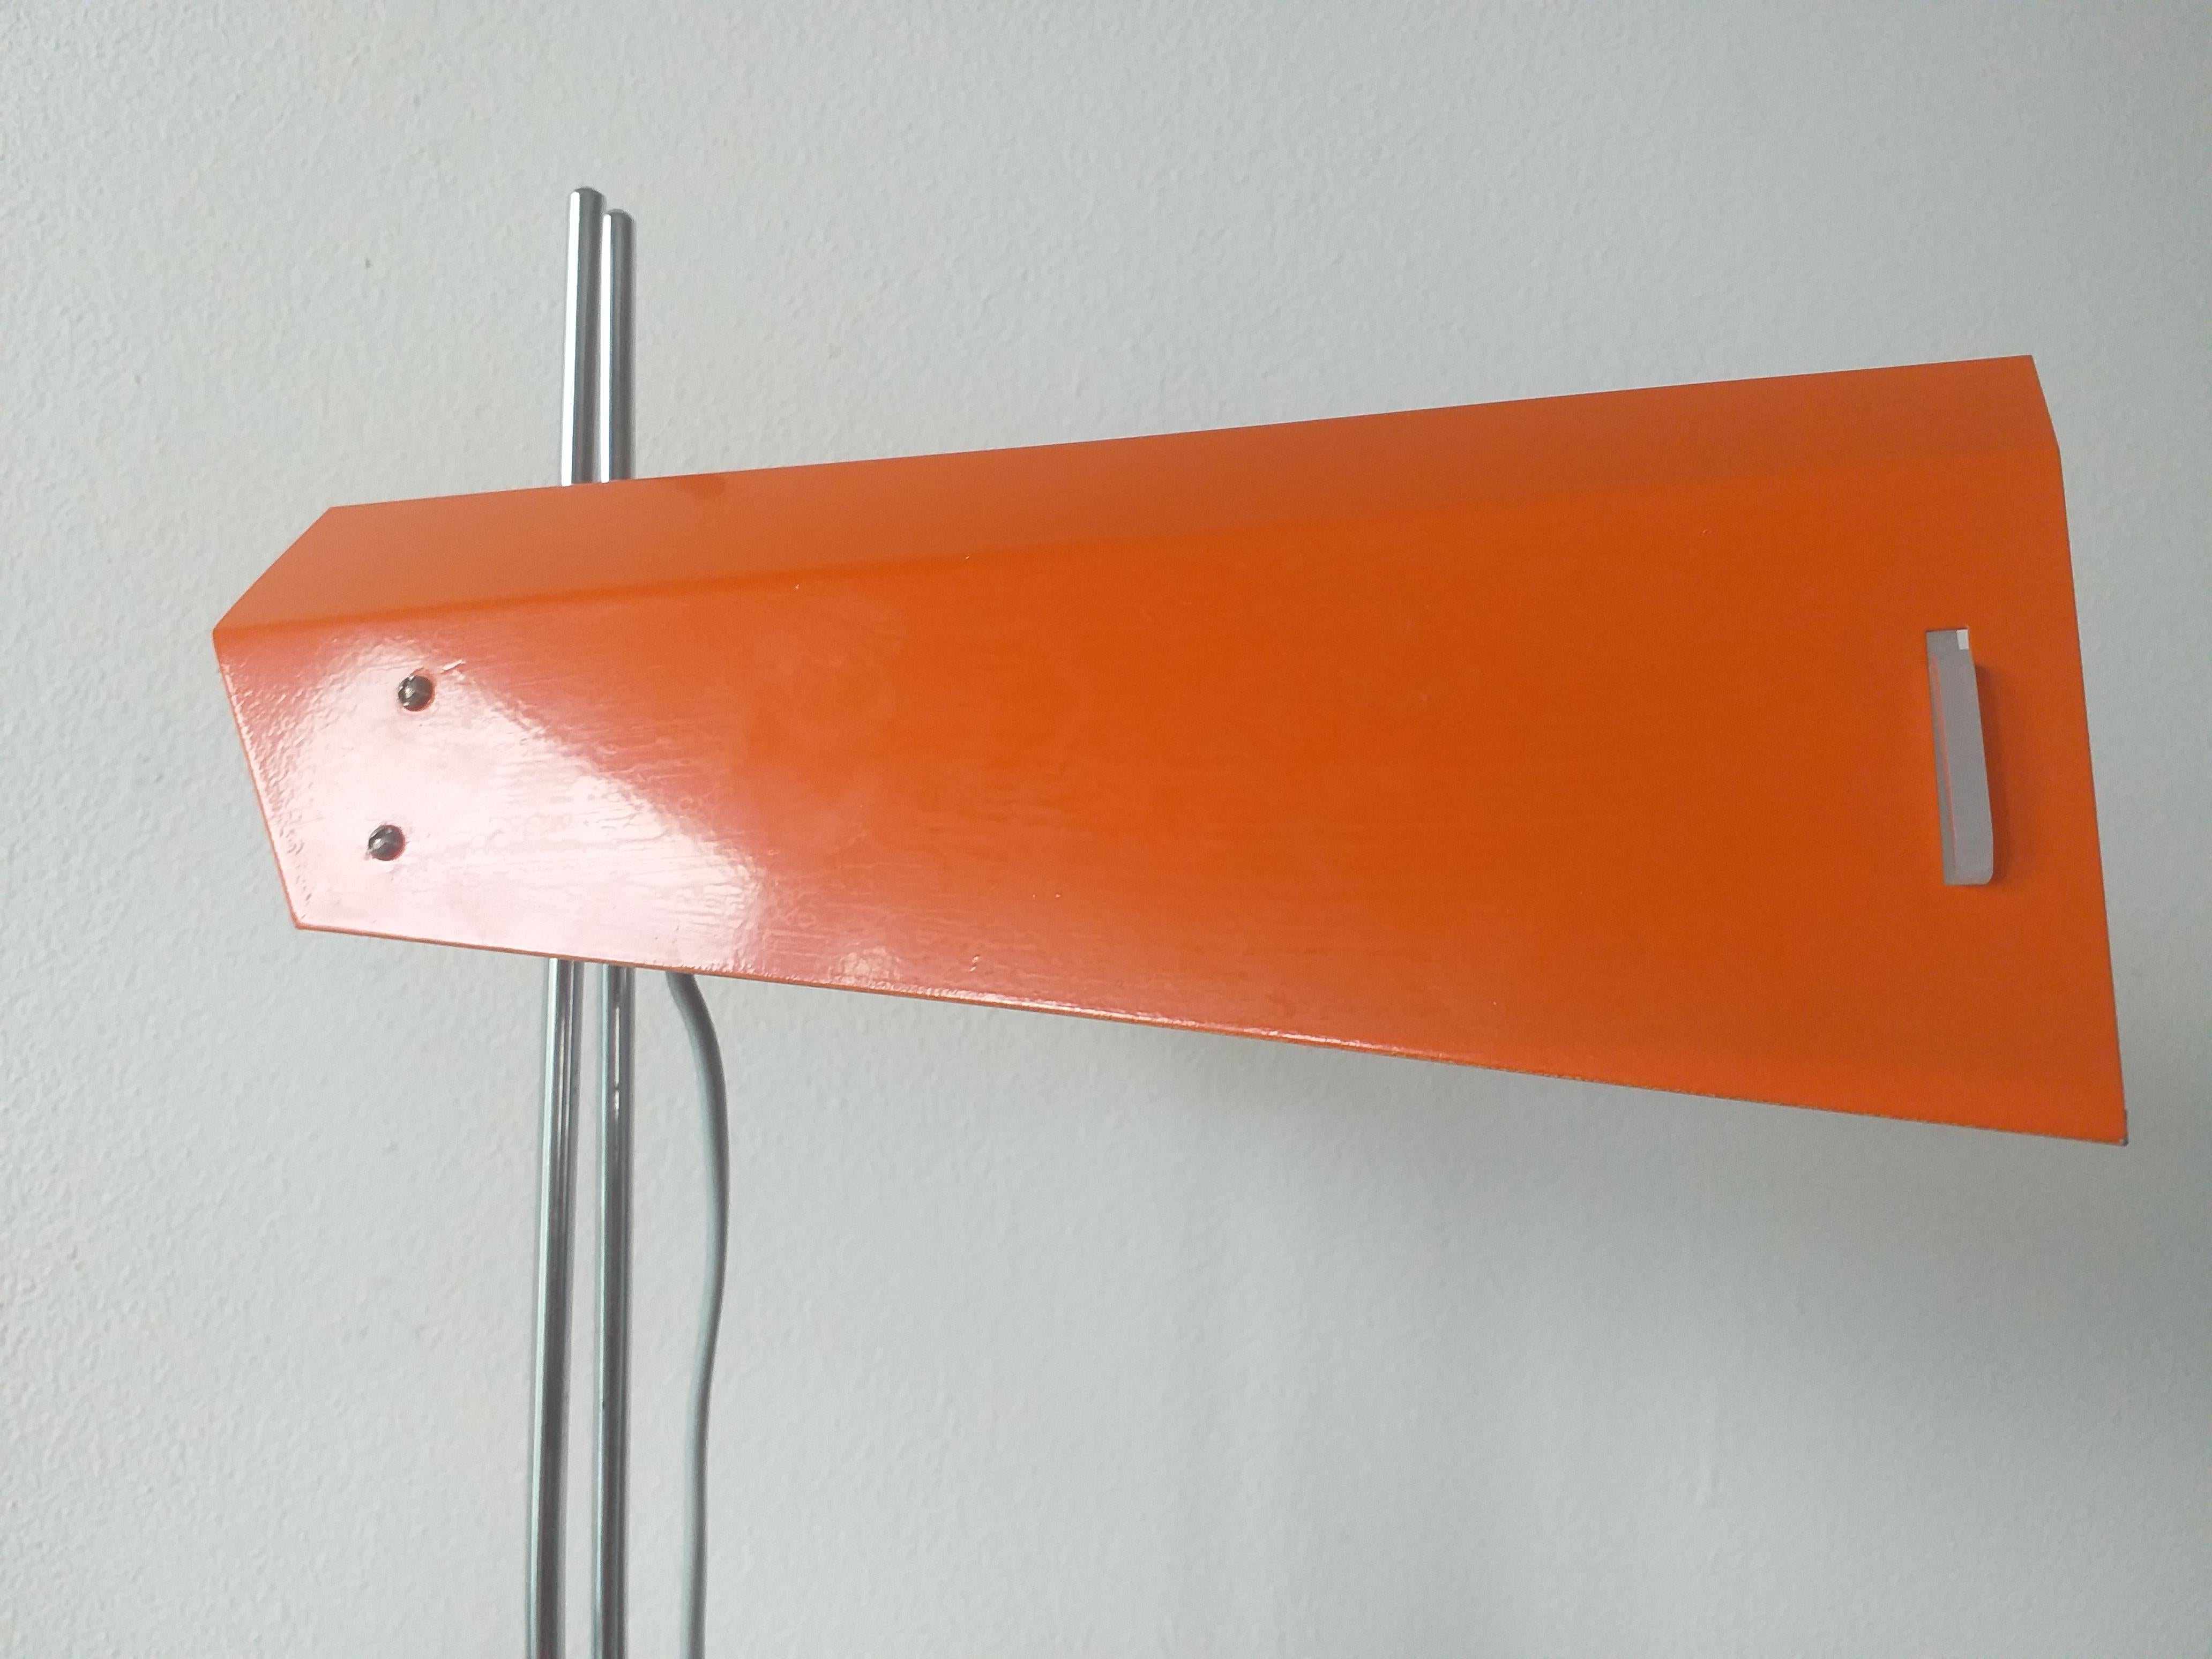 Mid-Century Modern Midcentury Table Lamp Lidokov Designed by Josef Hurka, 1970s For Sale